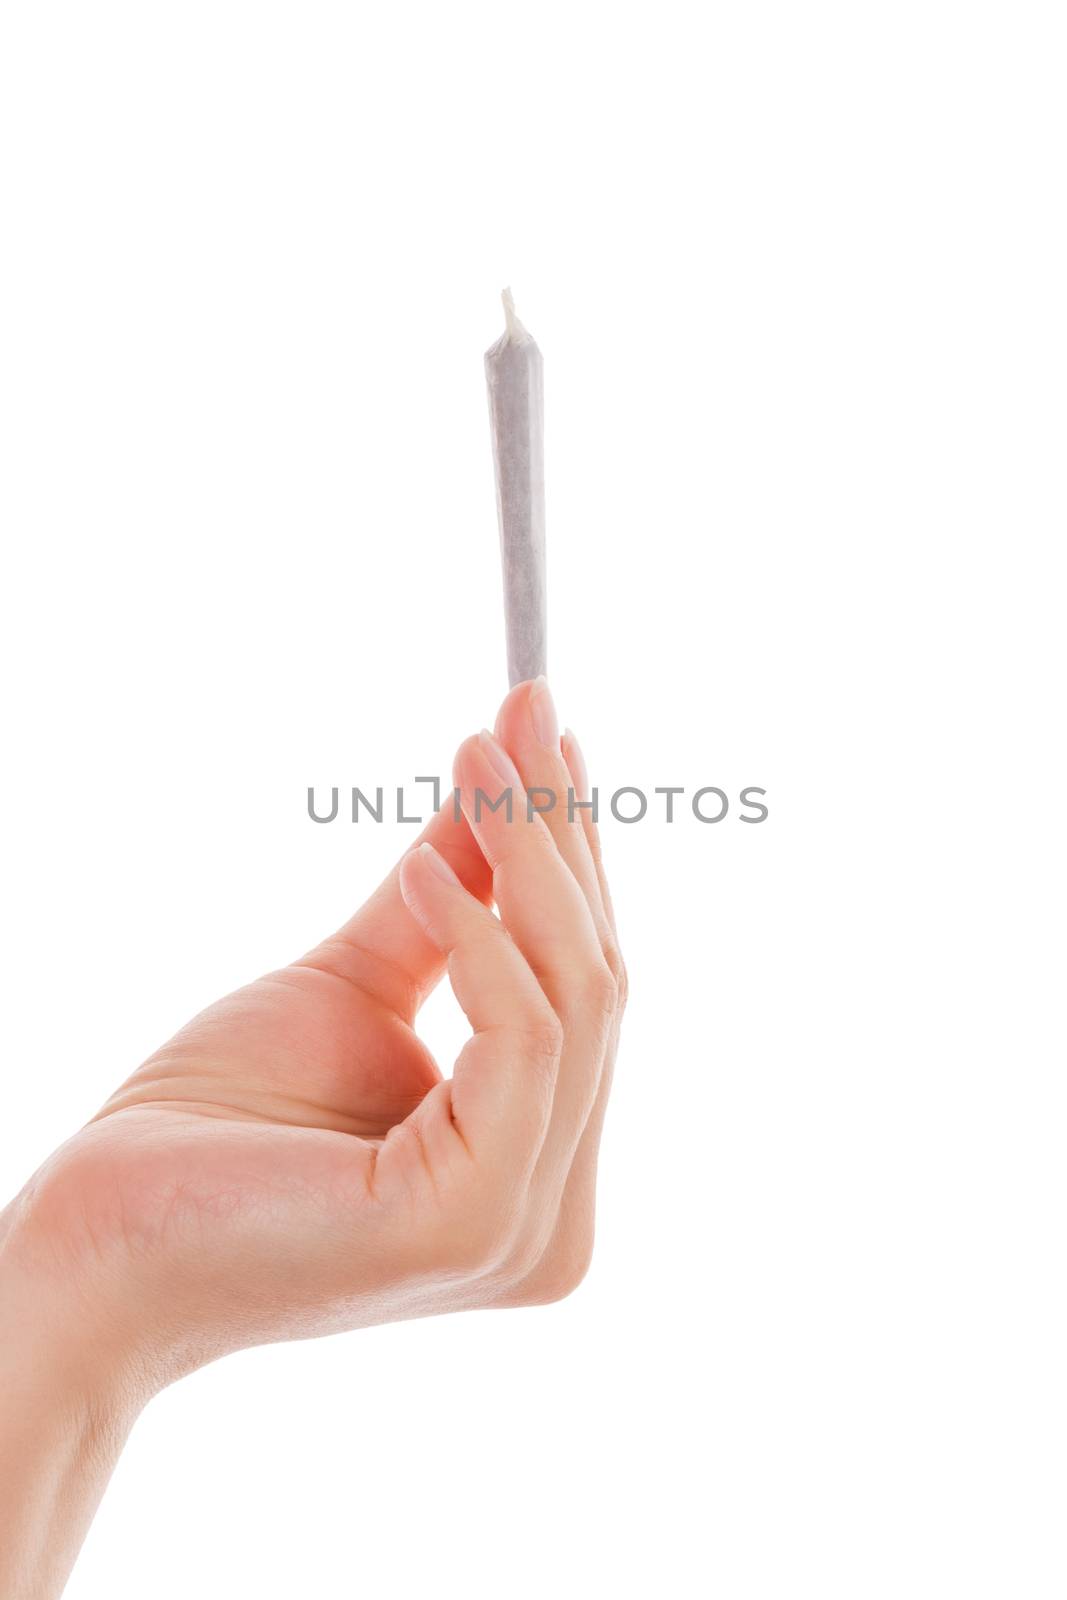 Holding cannabis joint. by eskymaks